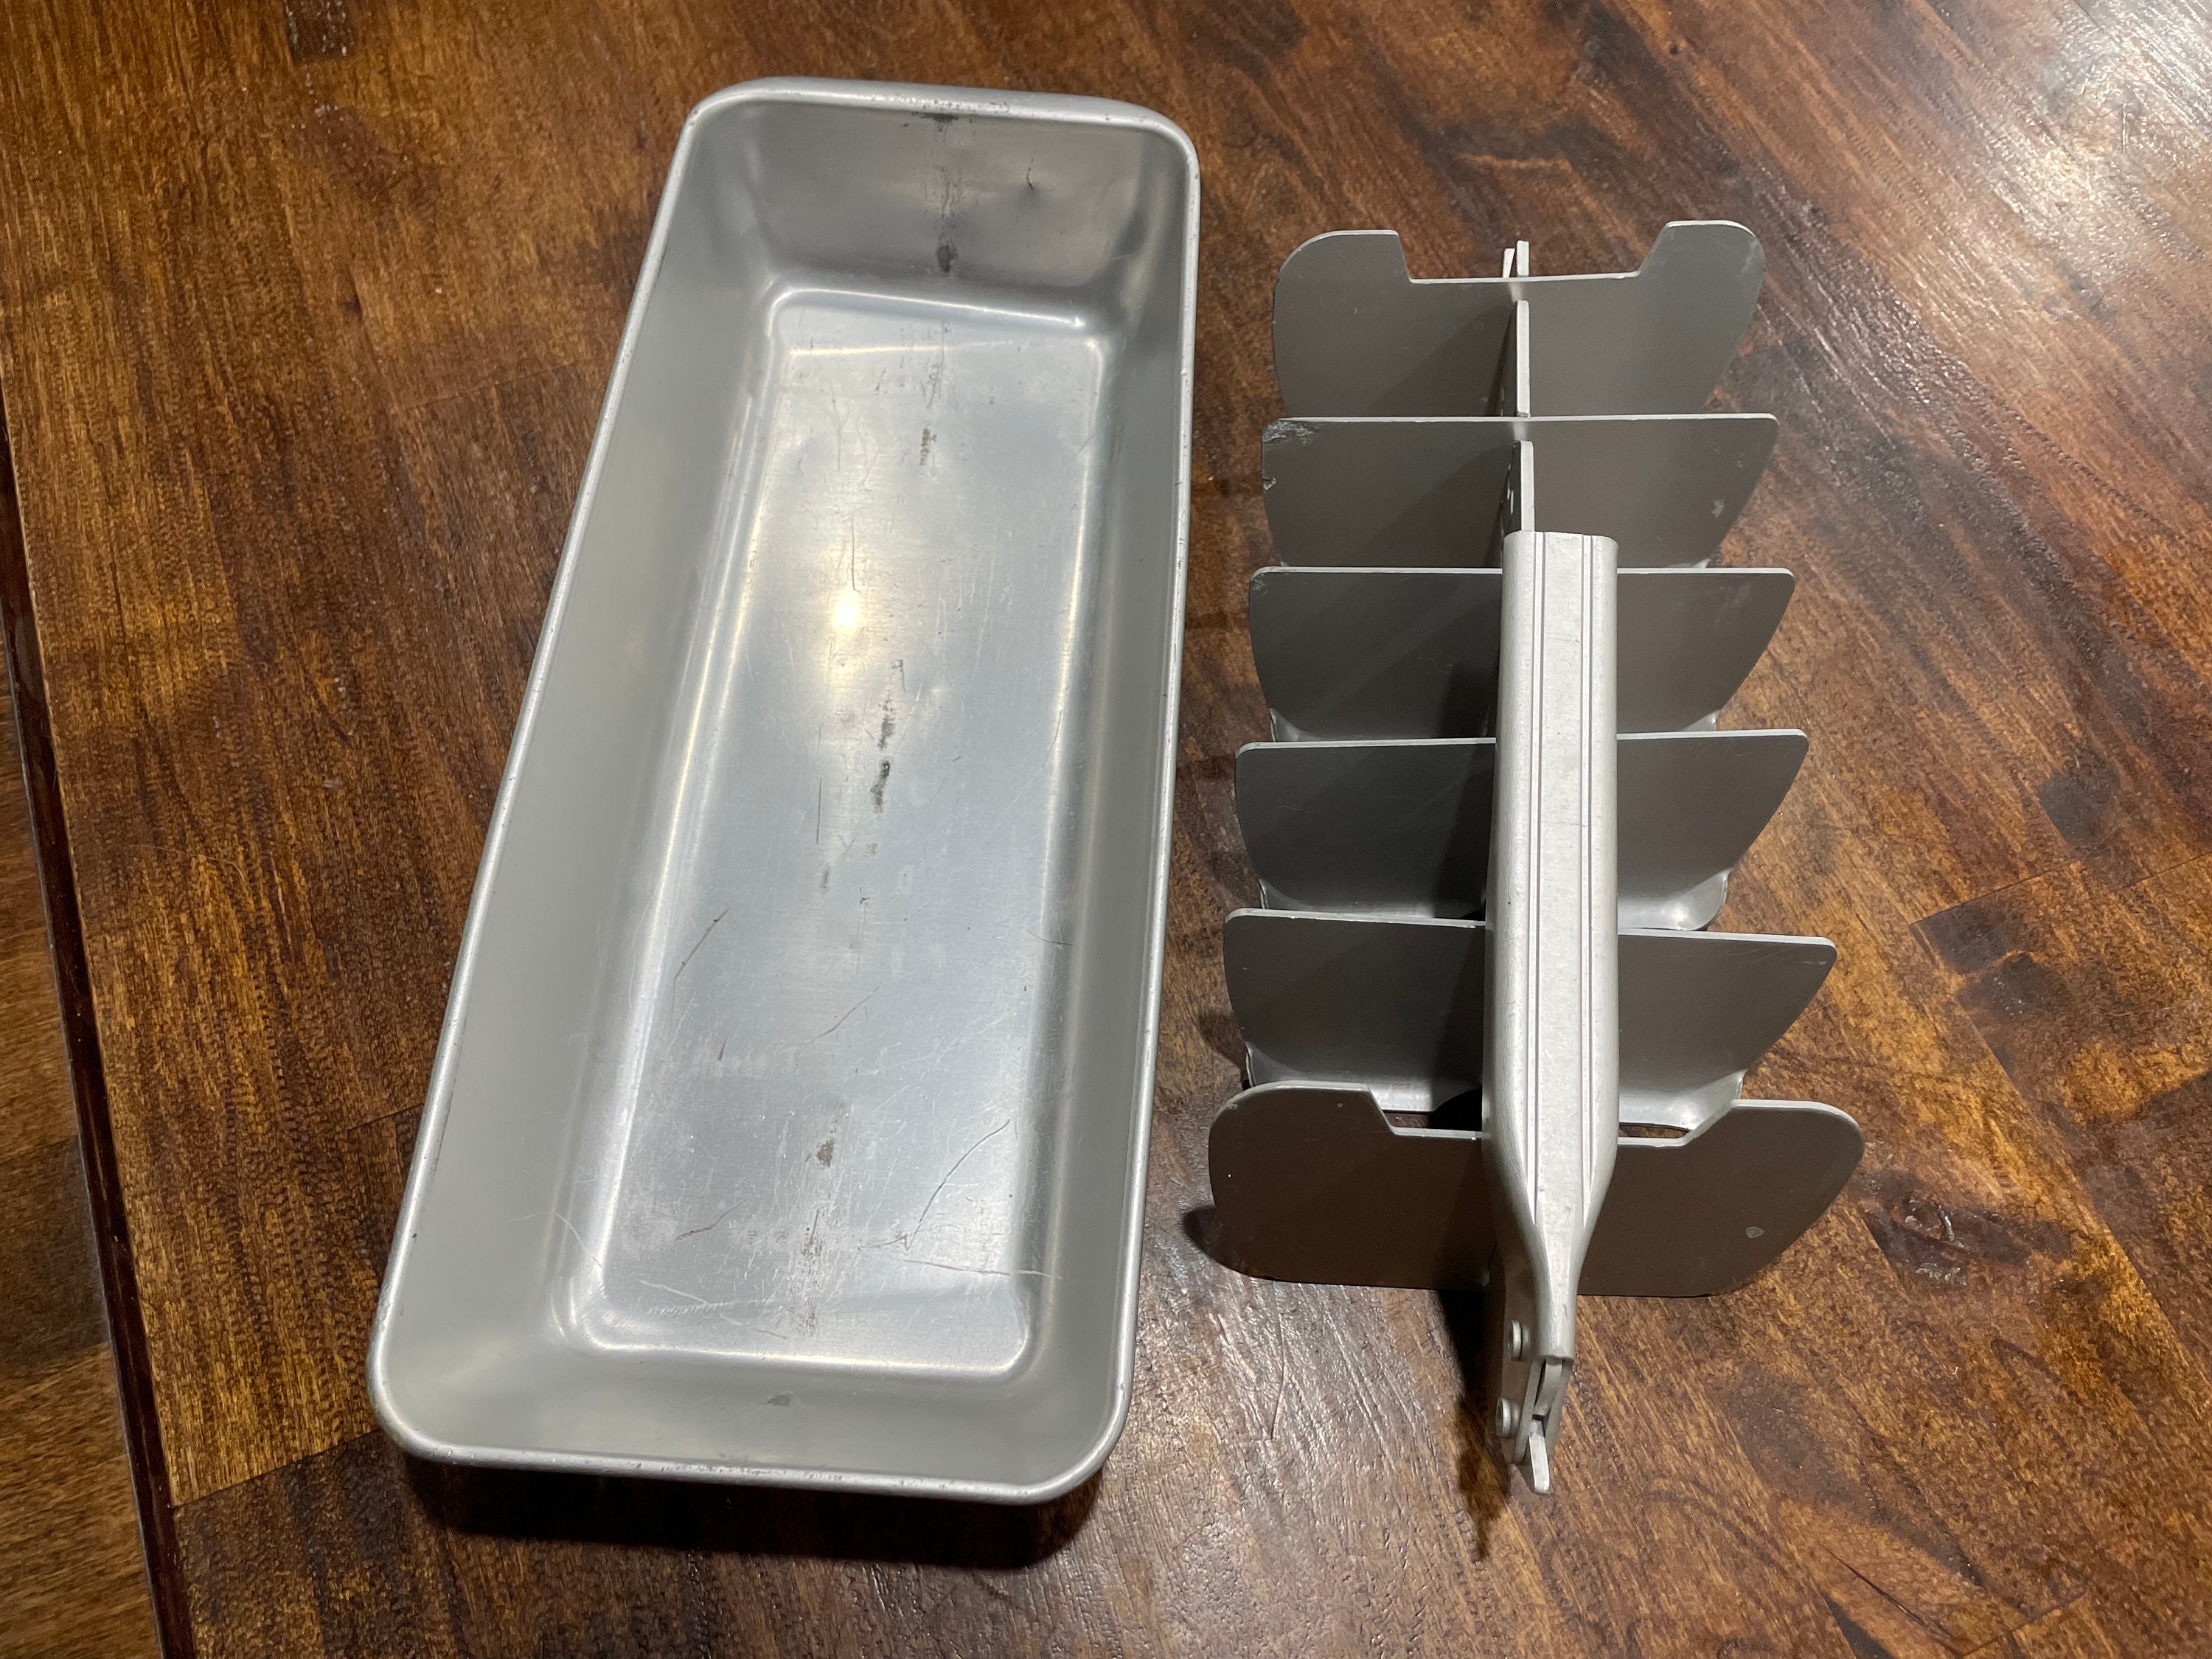 Vintage Metal Ice Trays Aluminum Cold Drinks Ice Cubes Kitchen 50s Photo  Prop Rhymeswithdaughter